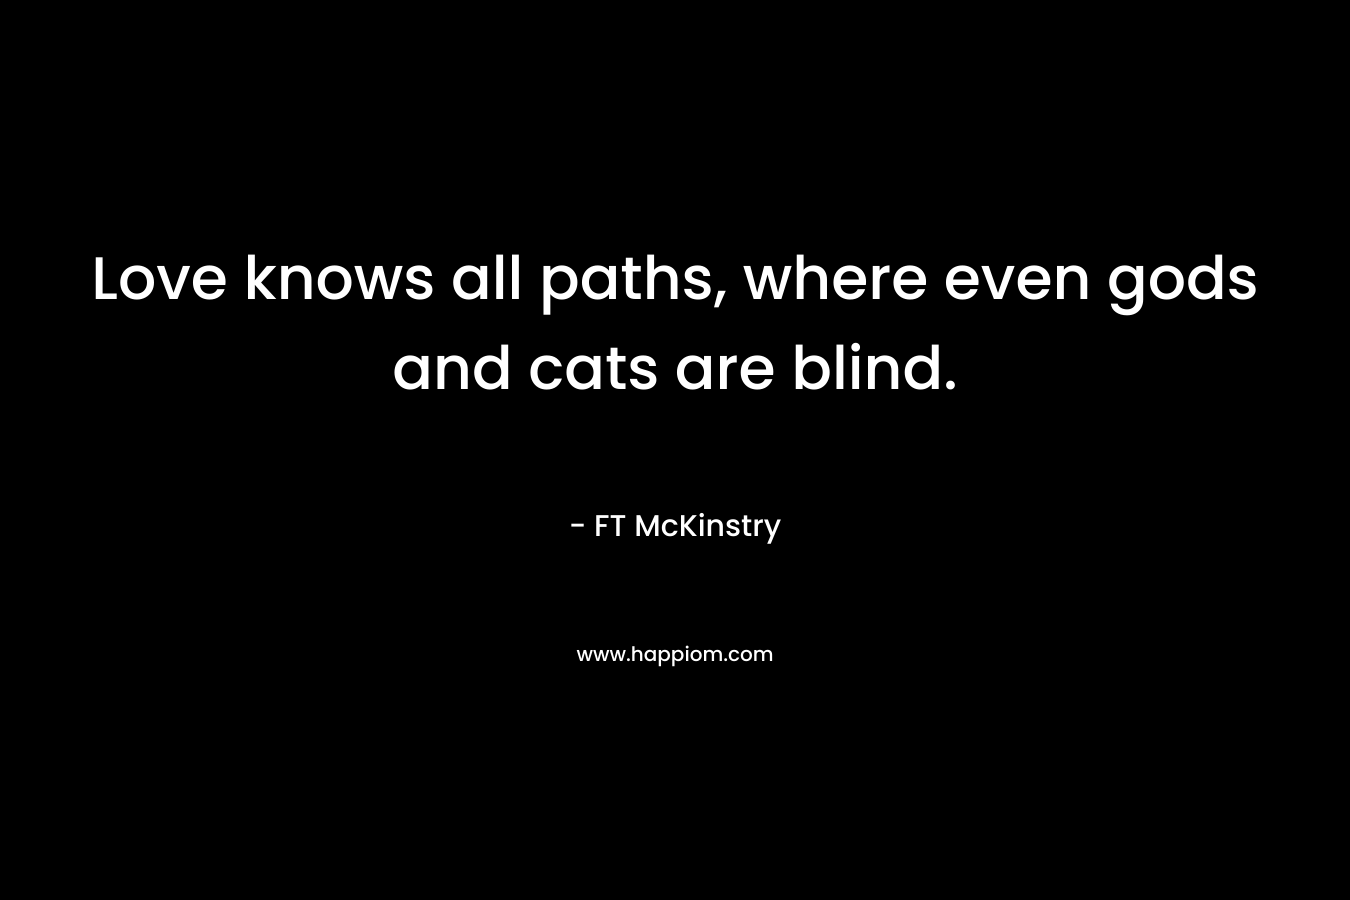 Love knows all paths, where even gods and cats are blind. – FT McKinstry